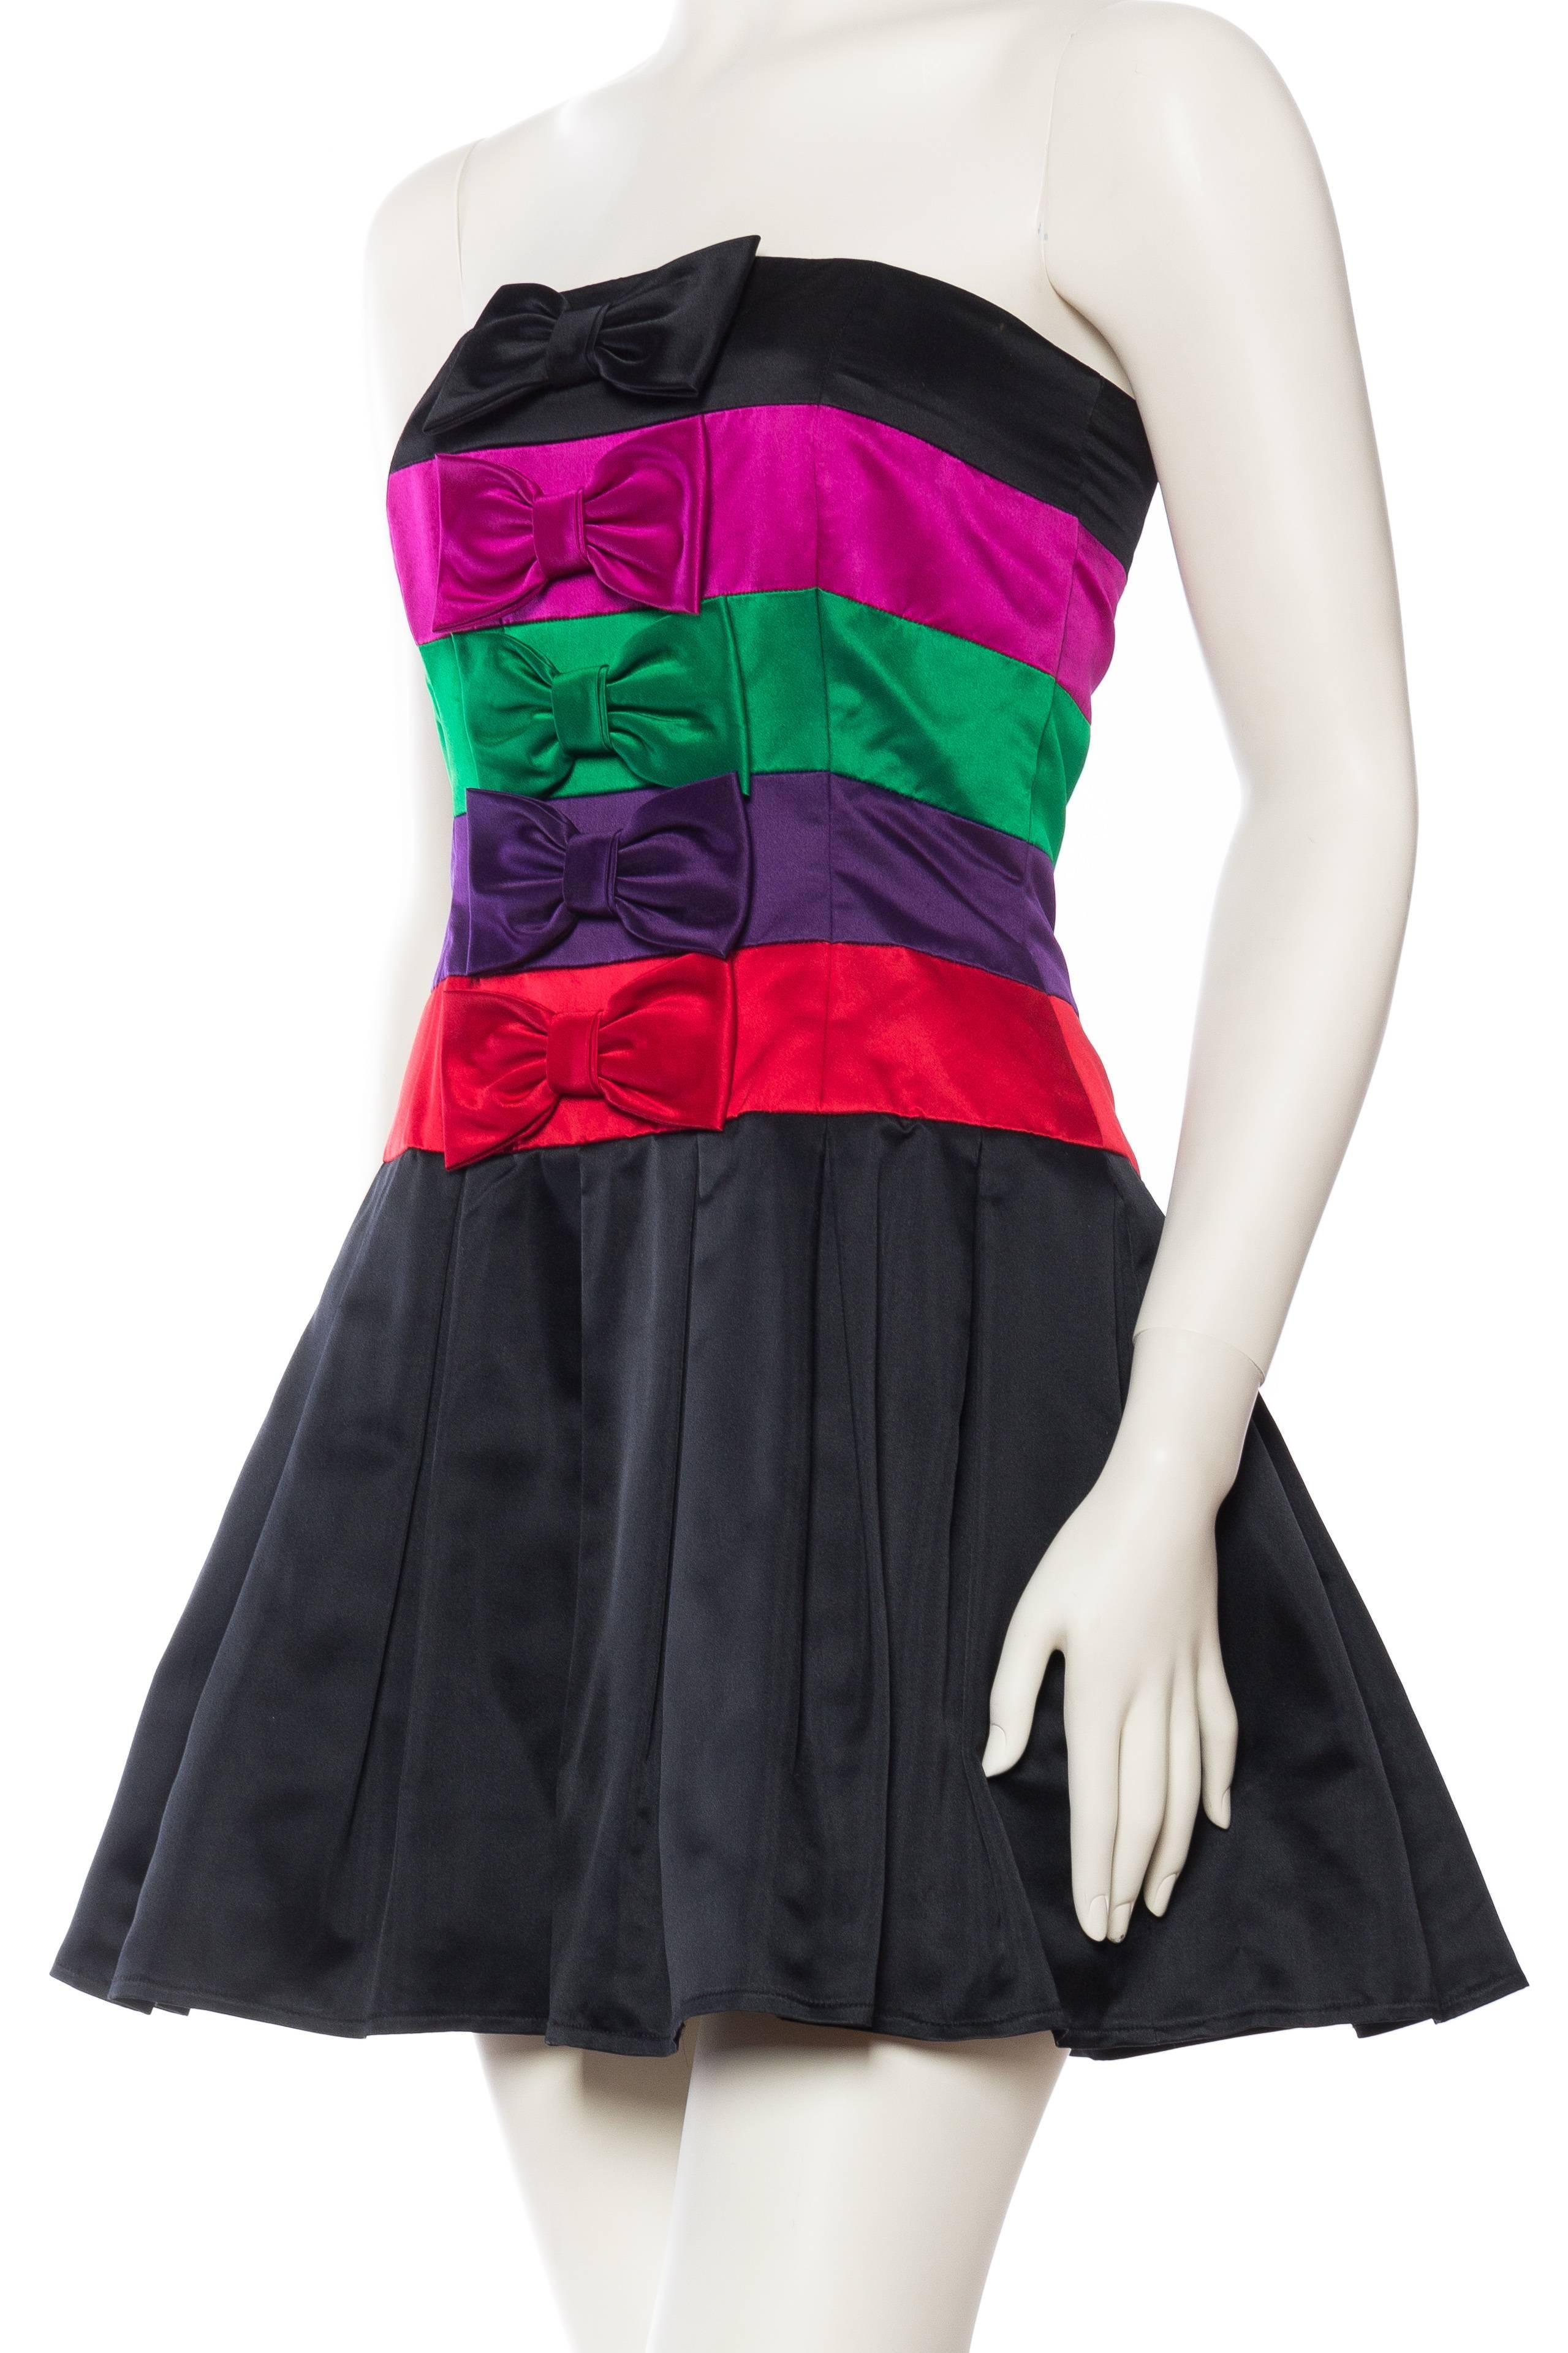 Women's 1980s Strapless Albert Nipon Demi-Couture Silk Dress with Bows